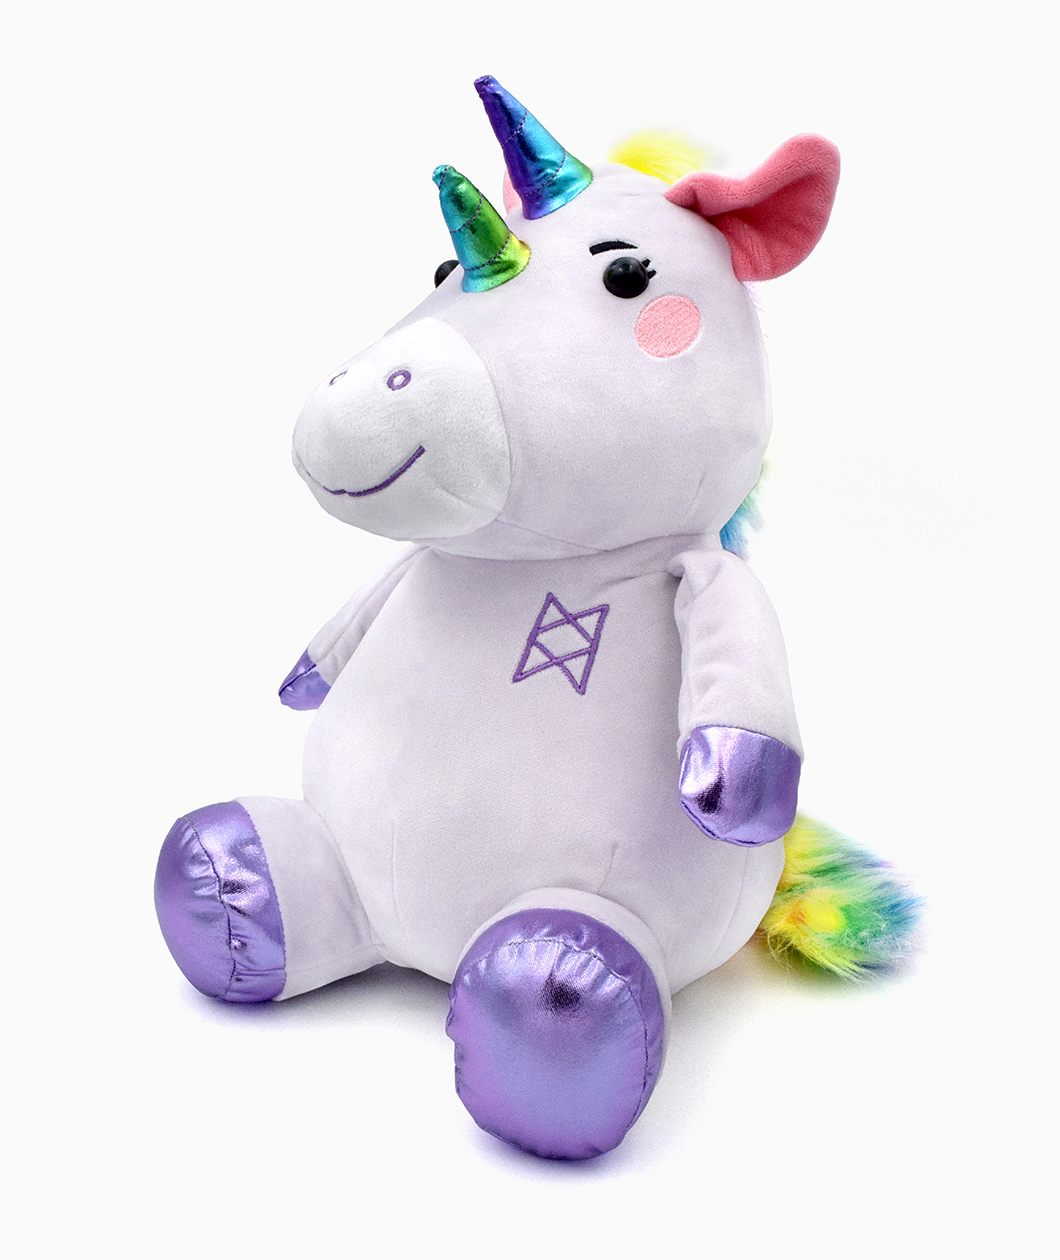 The Garyl plushie which is a light purple unicorn with two shiny rainbow horns on the center of its forehead. A rainbow fur mane of hair flows from the head to its tail. It has a purple embroidered insignia on its left chest and bright shiny purple fabric for hooves on its hands and feet. 14" tall in sitting position including its horns.